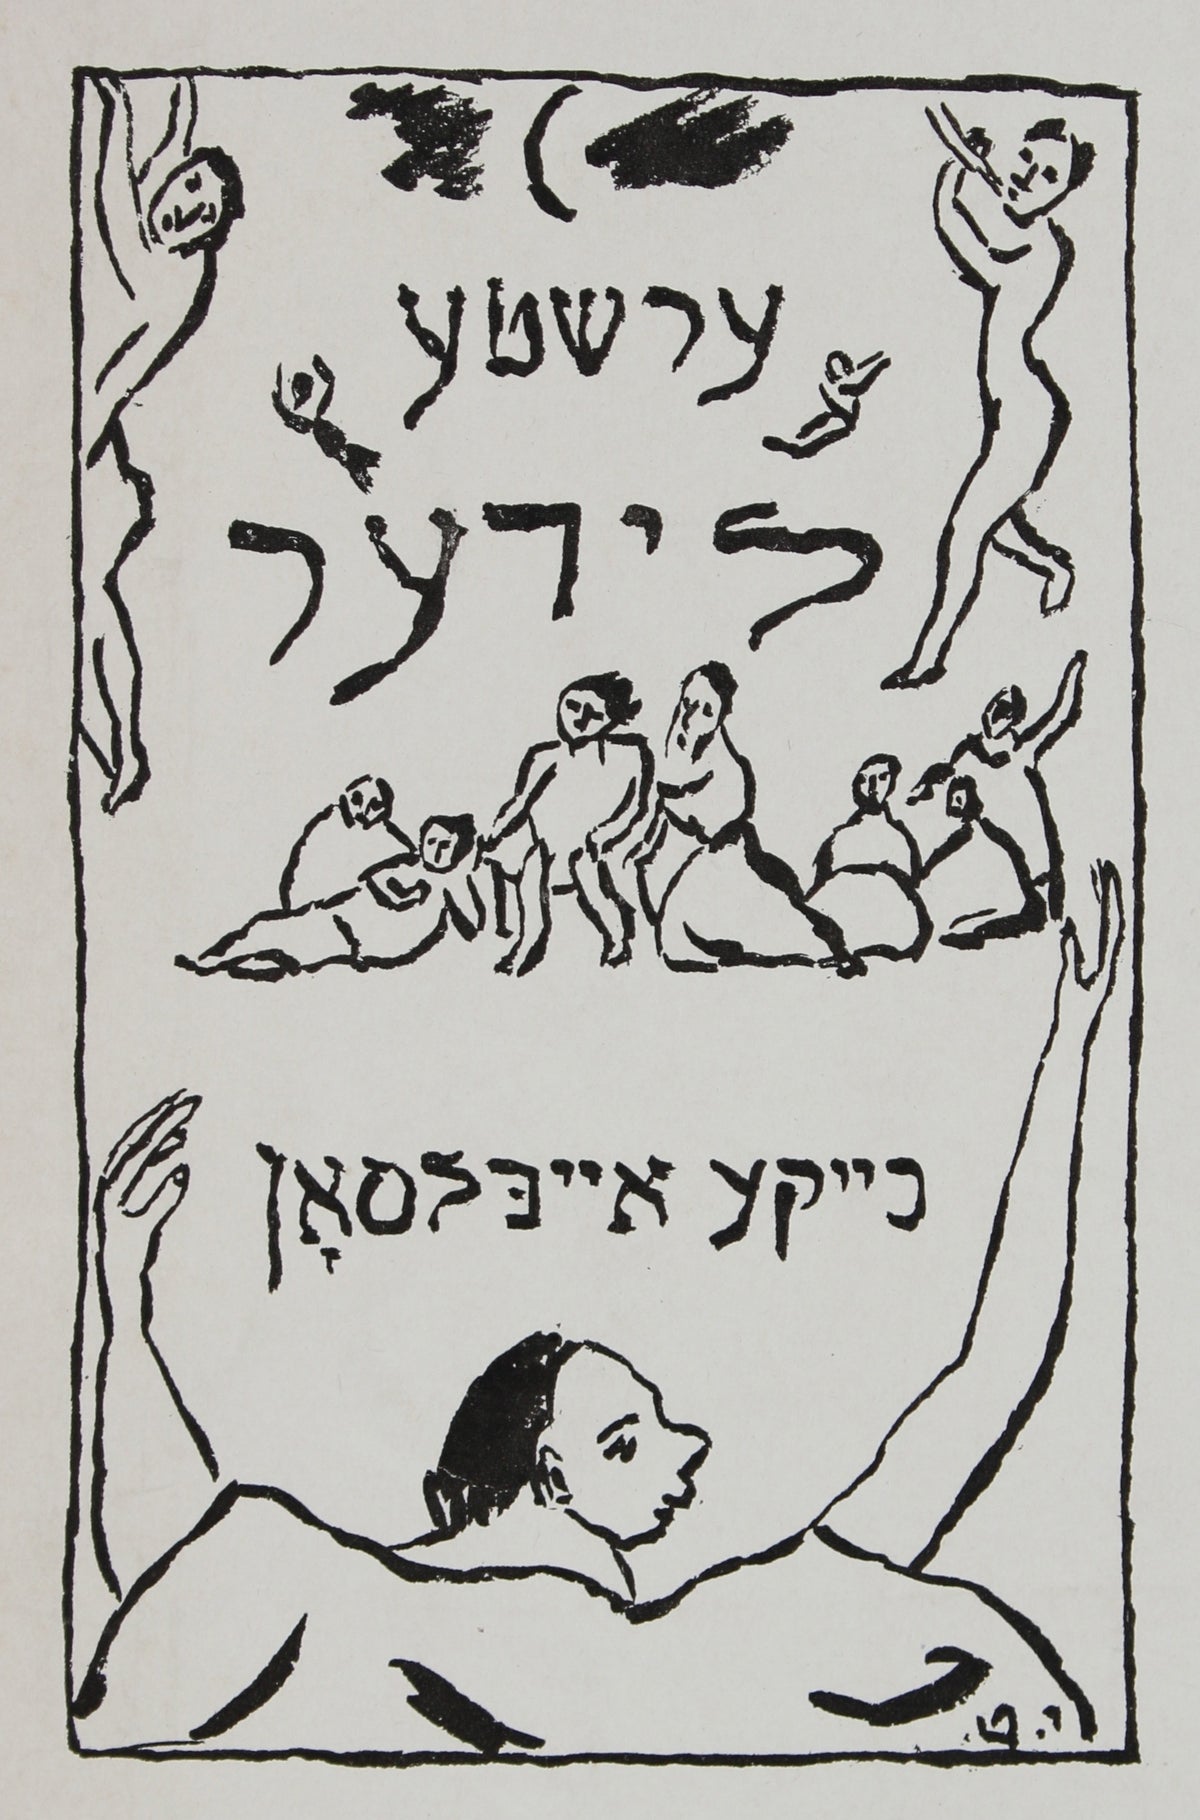 Mimeograph with Figures &amp; Hebrew Text&lt;br&gt;Early-Mid 20th Century&lt;br&gt;&lt;br&gt;#95877